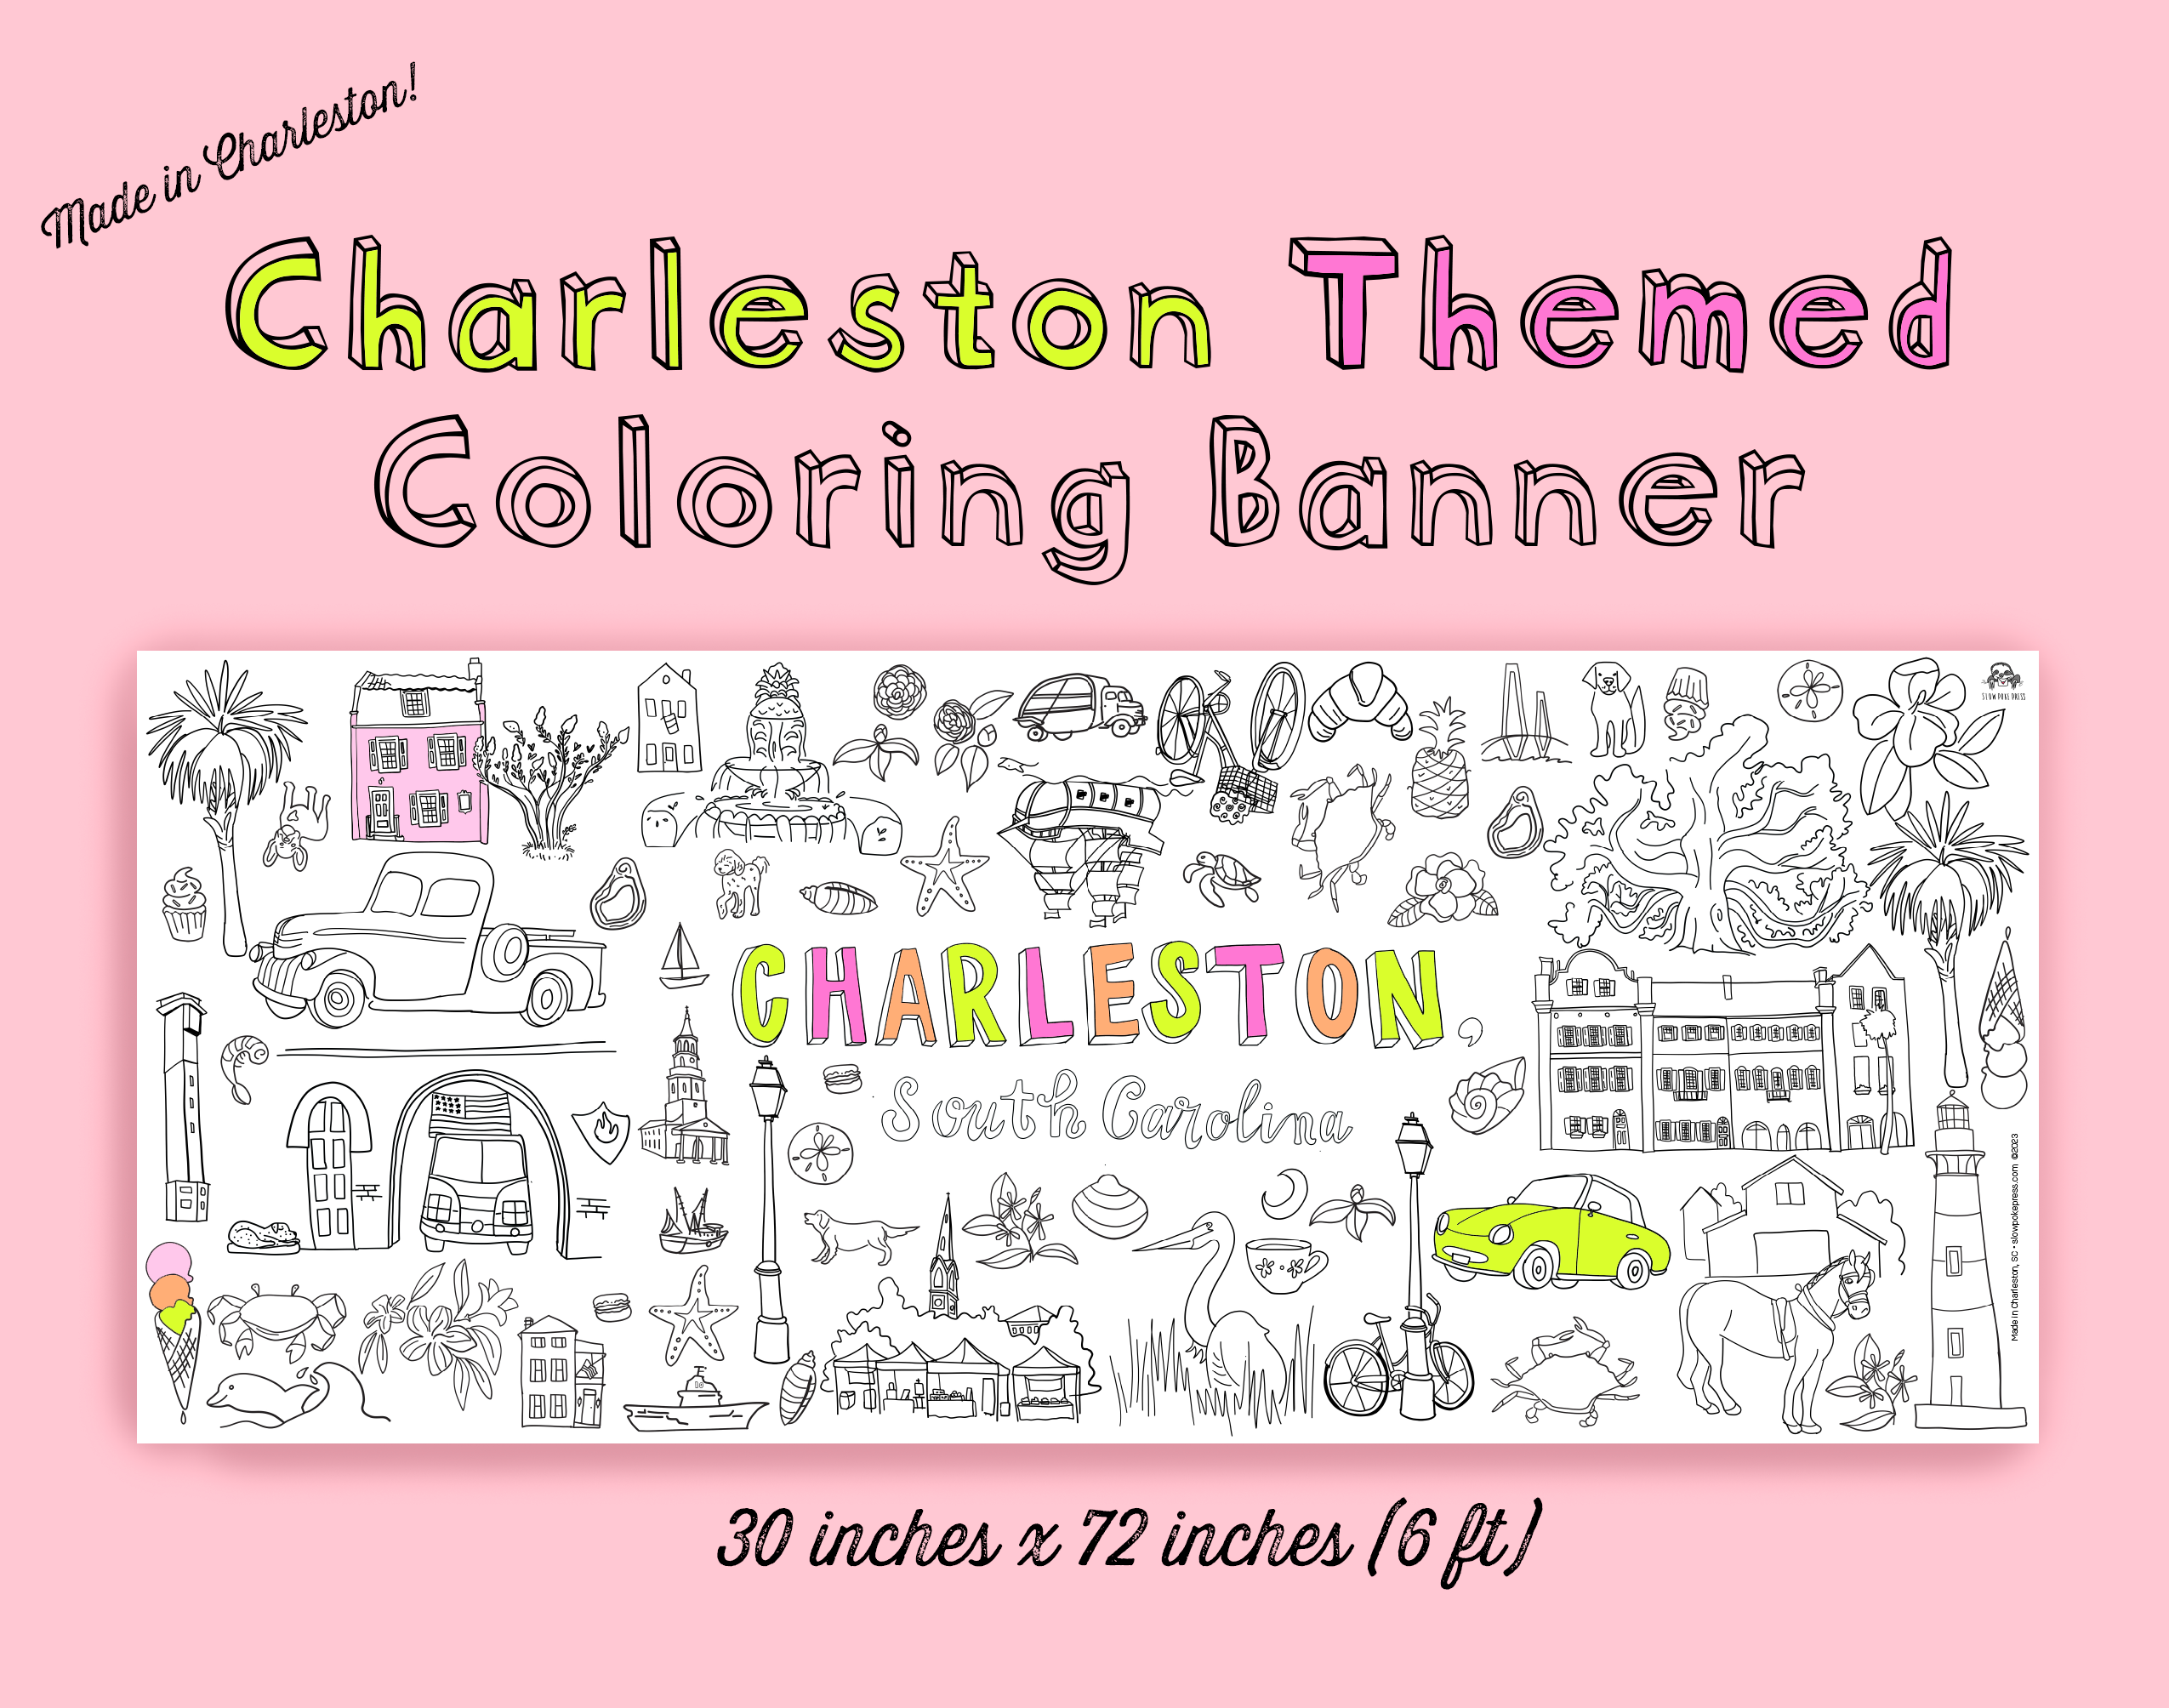 Charleston Themed Coloring Banner, Giant Coloring Page, Party Table Cover that can be Colored